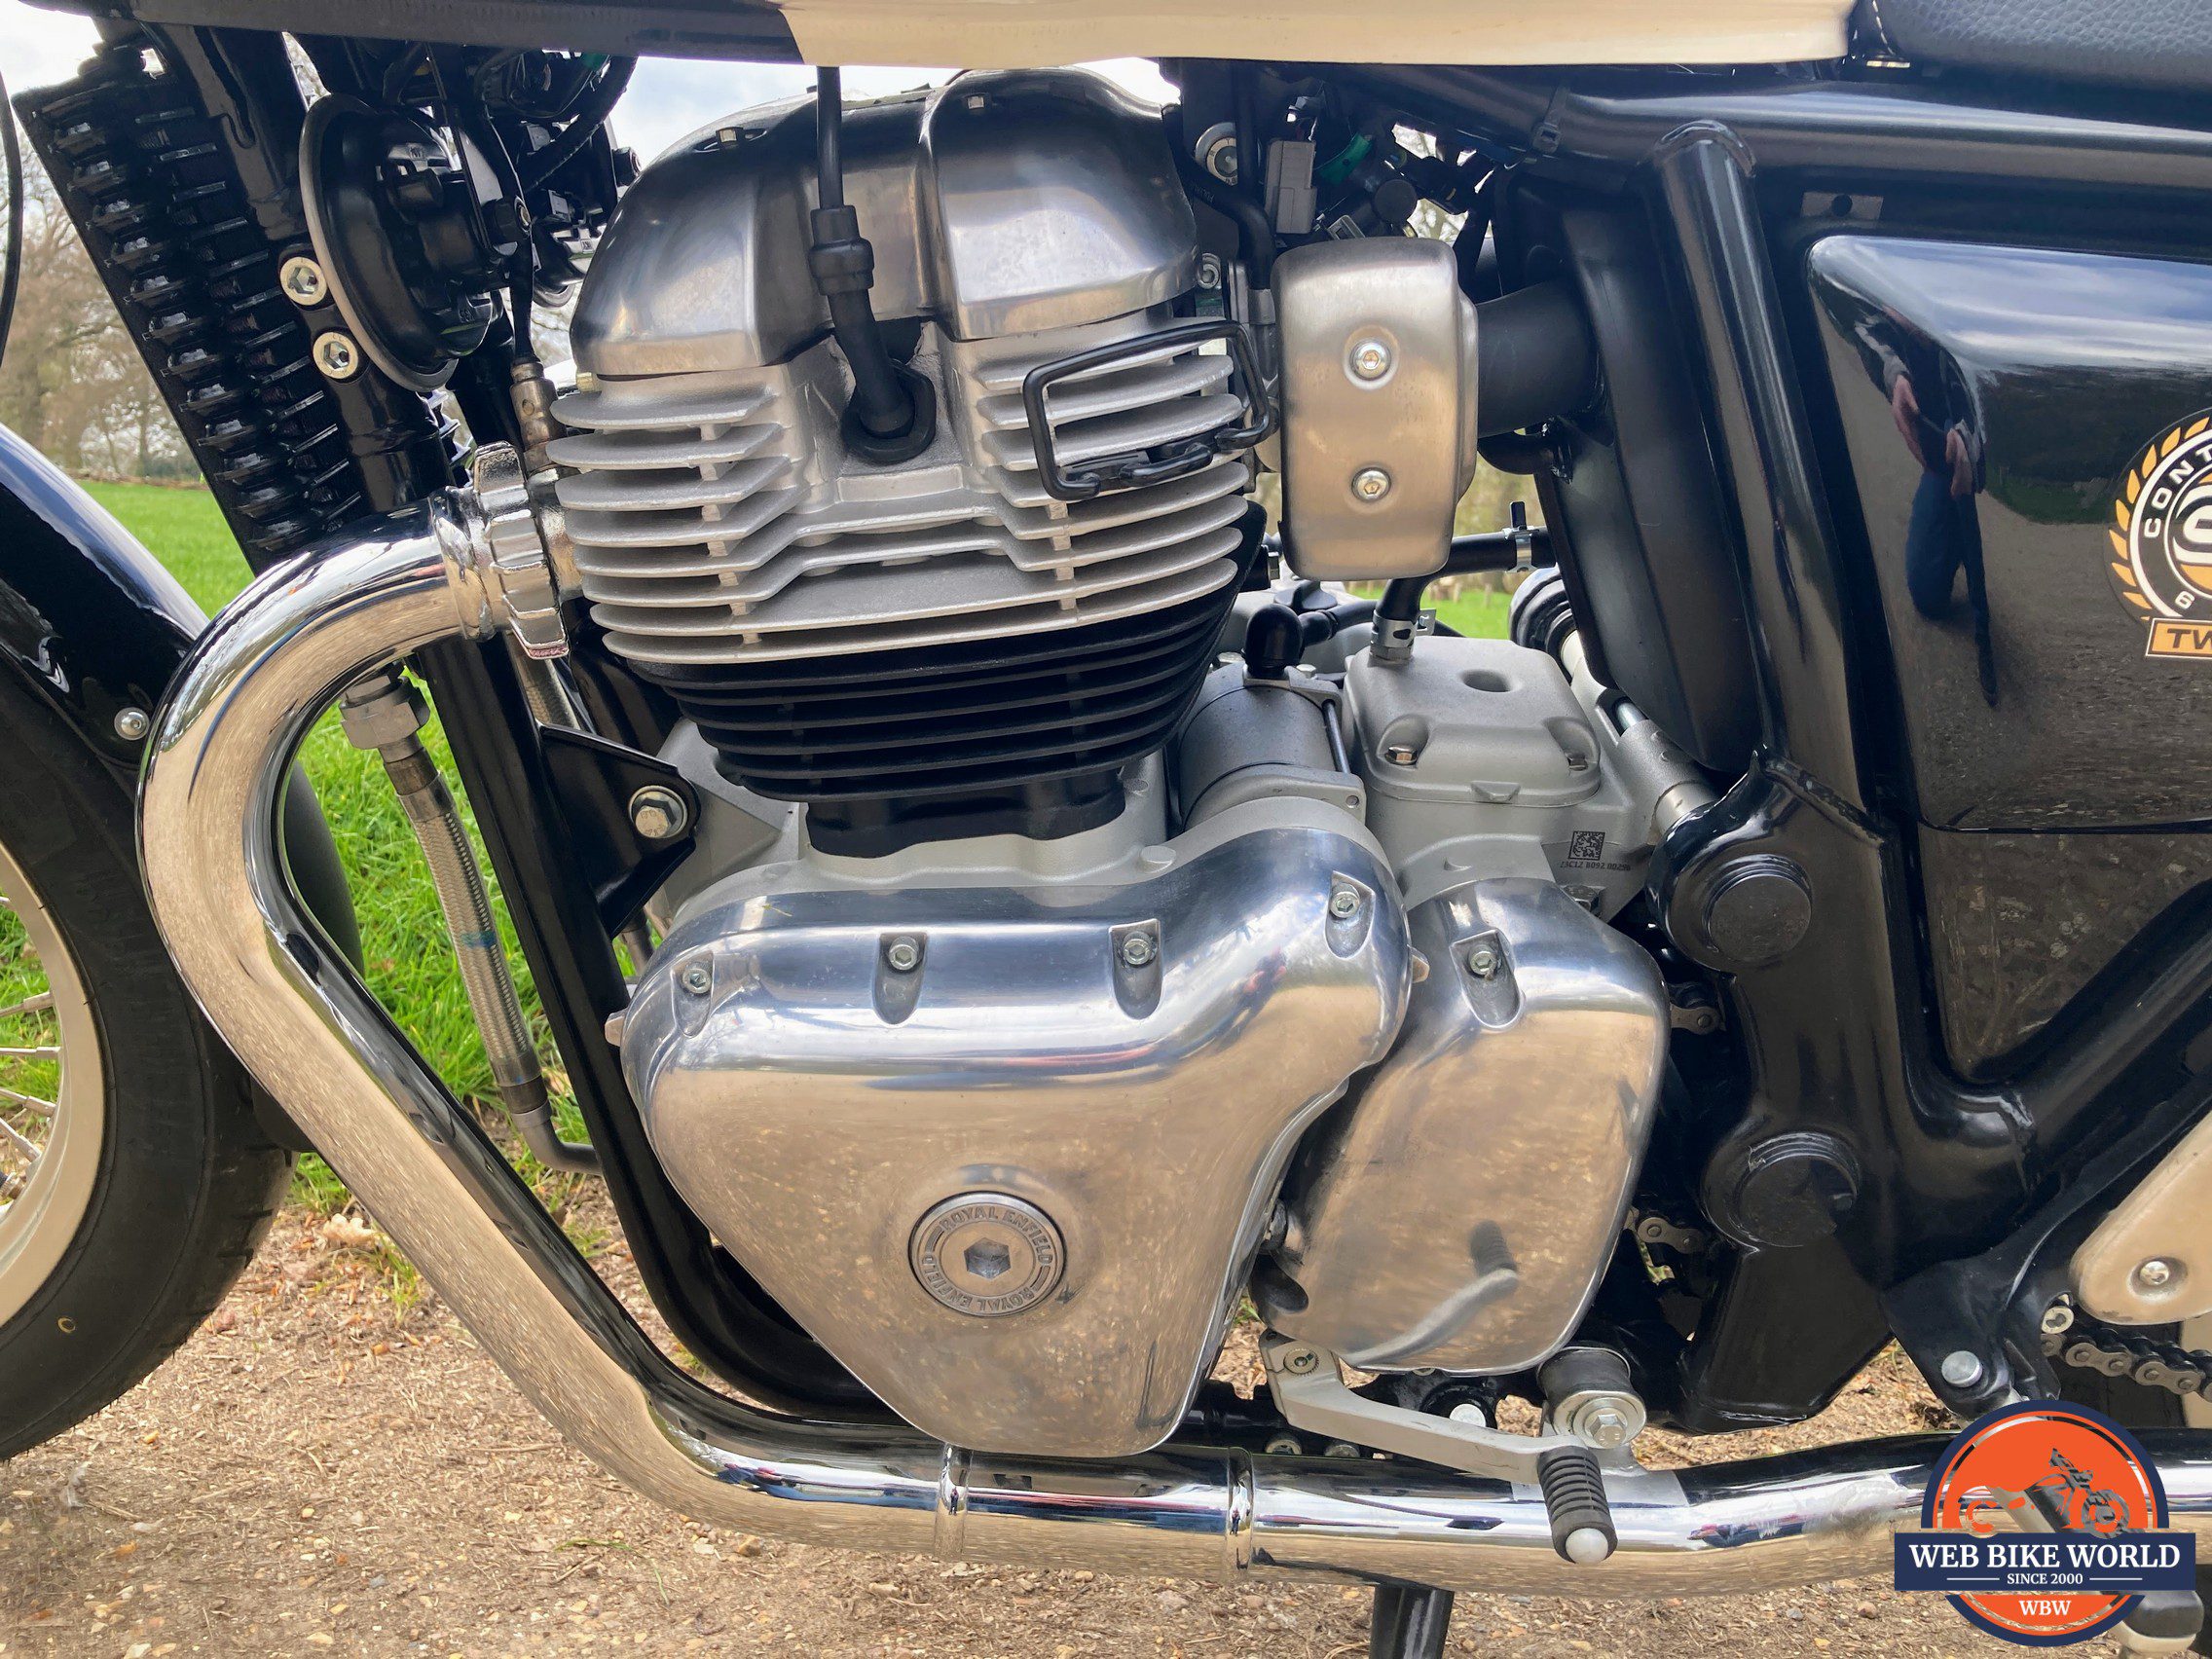 Royal Enfield Continental GT650 engine